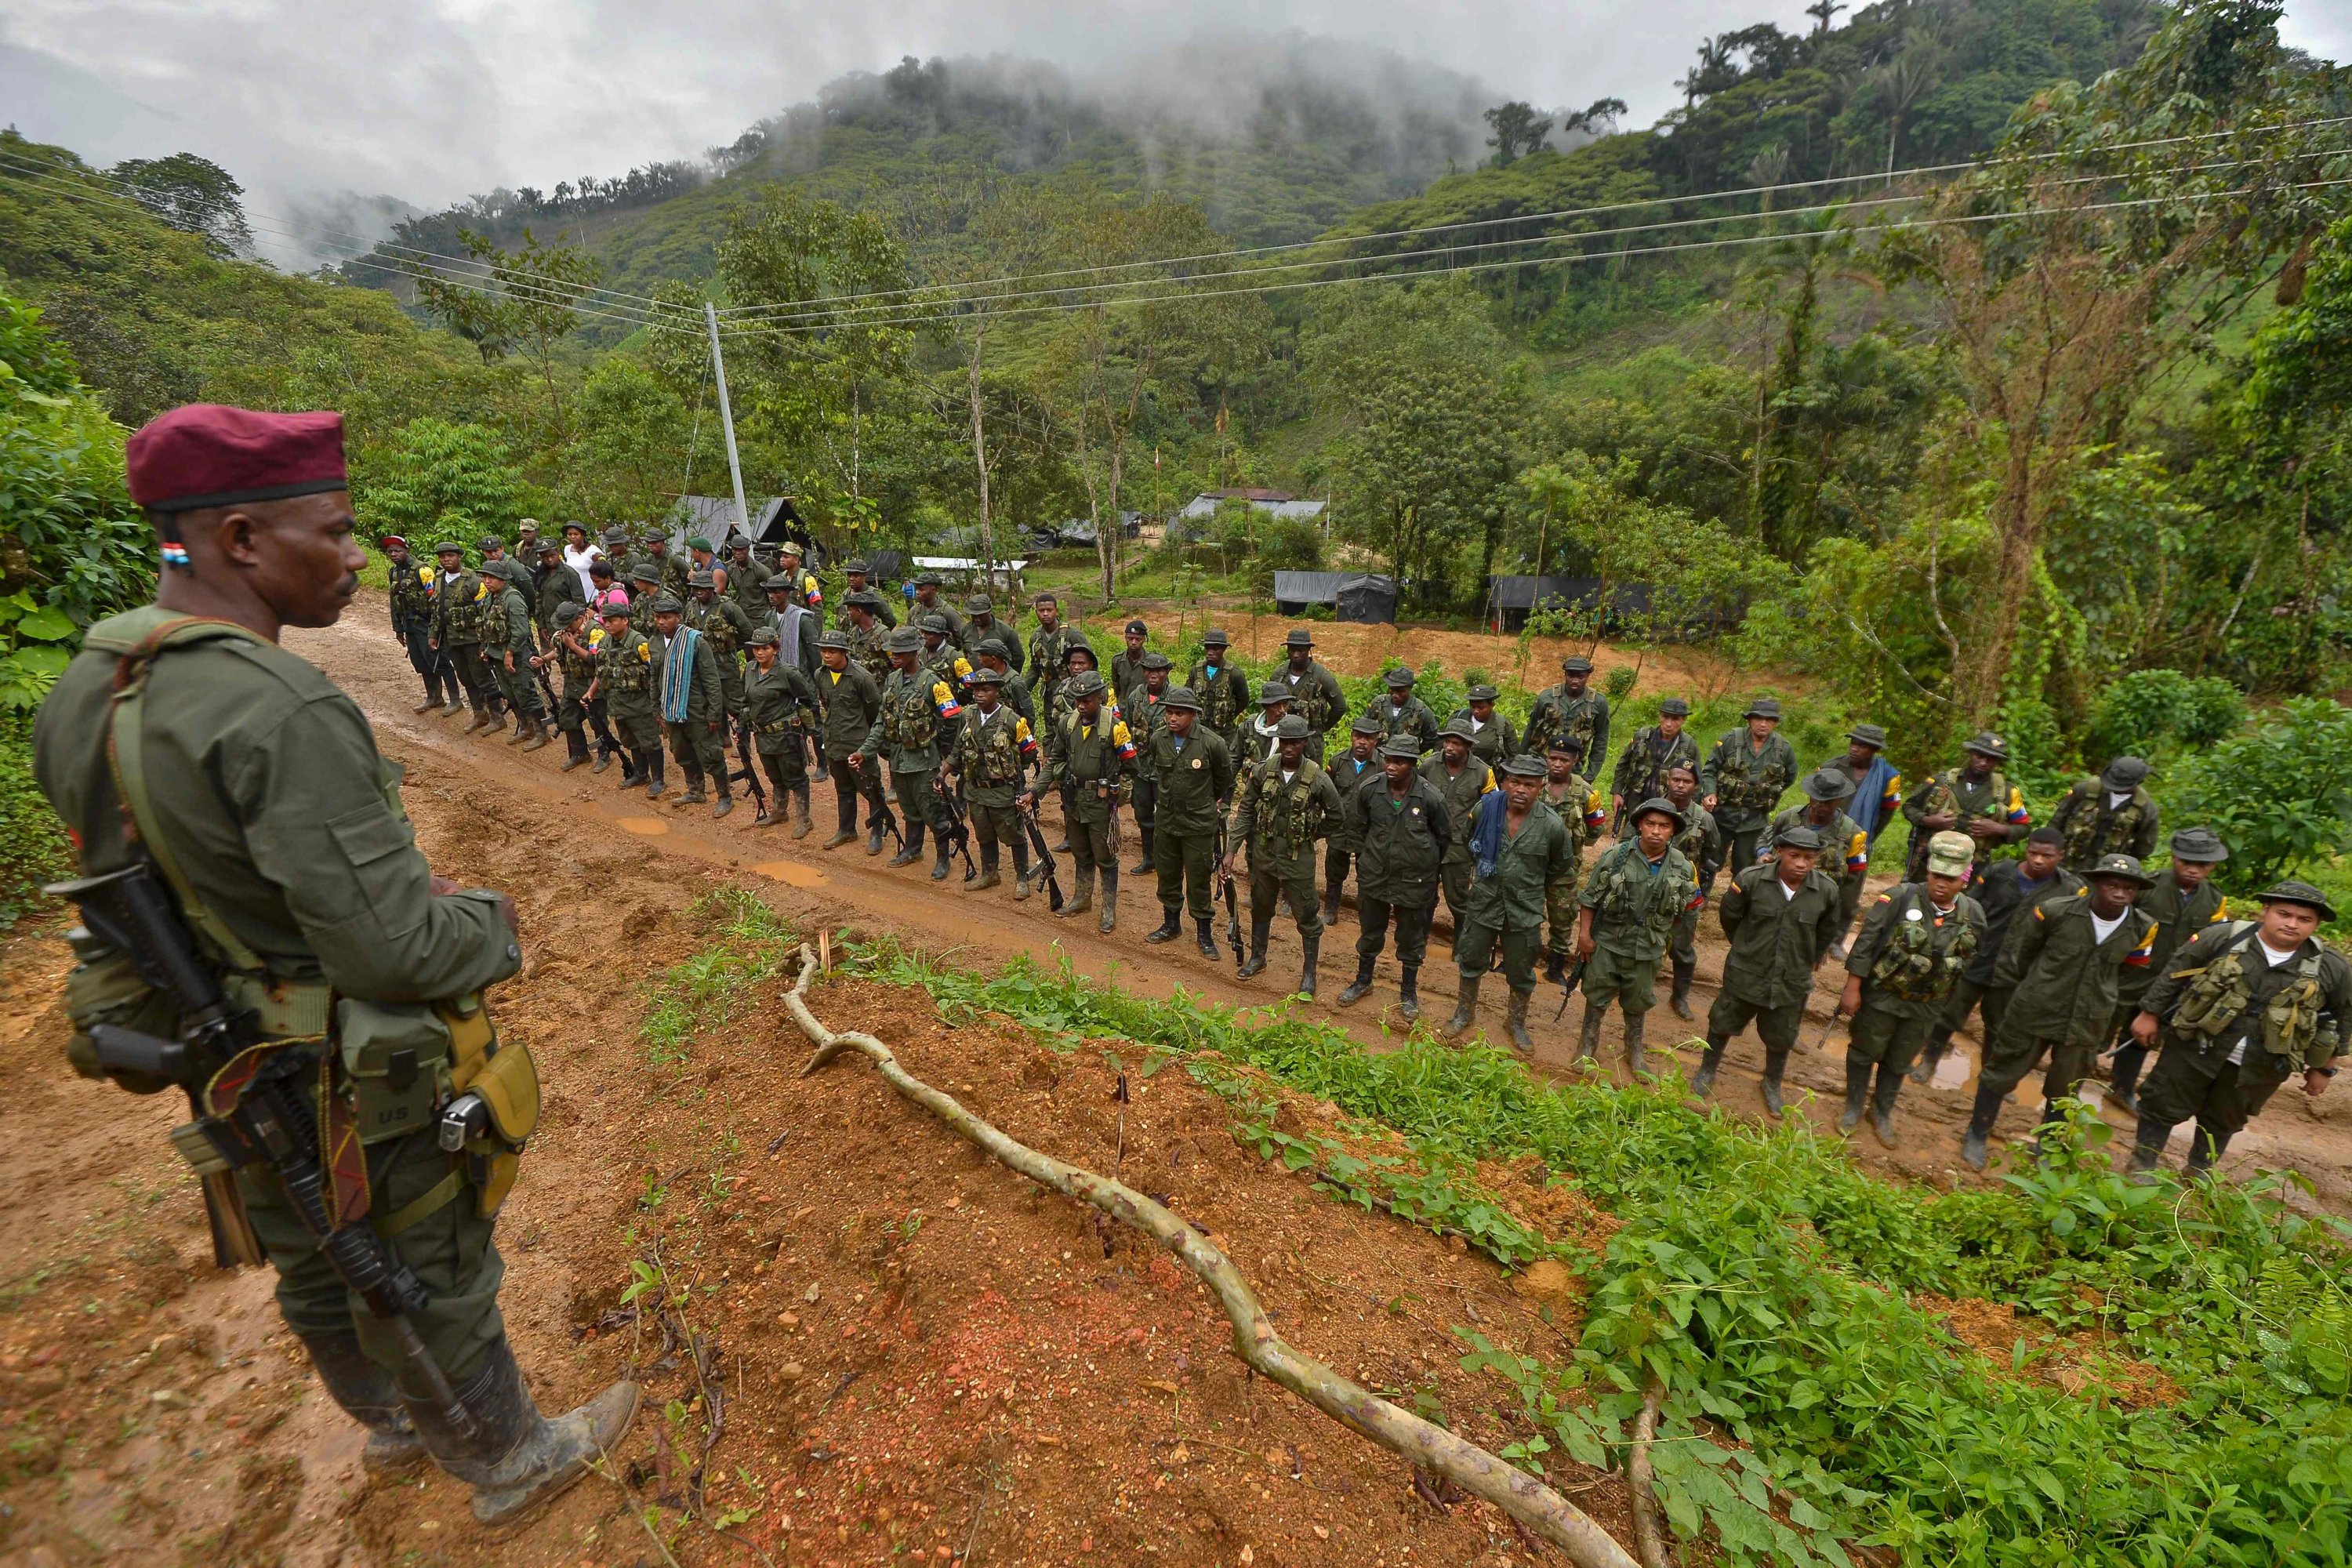 colombian armed conflict summary